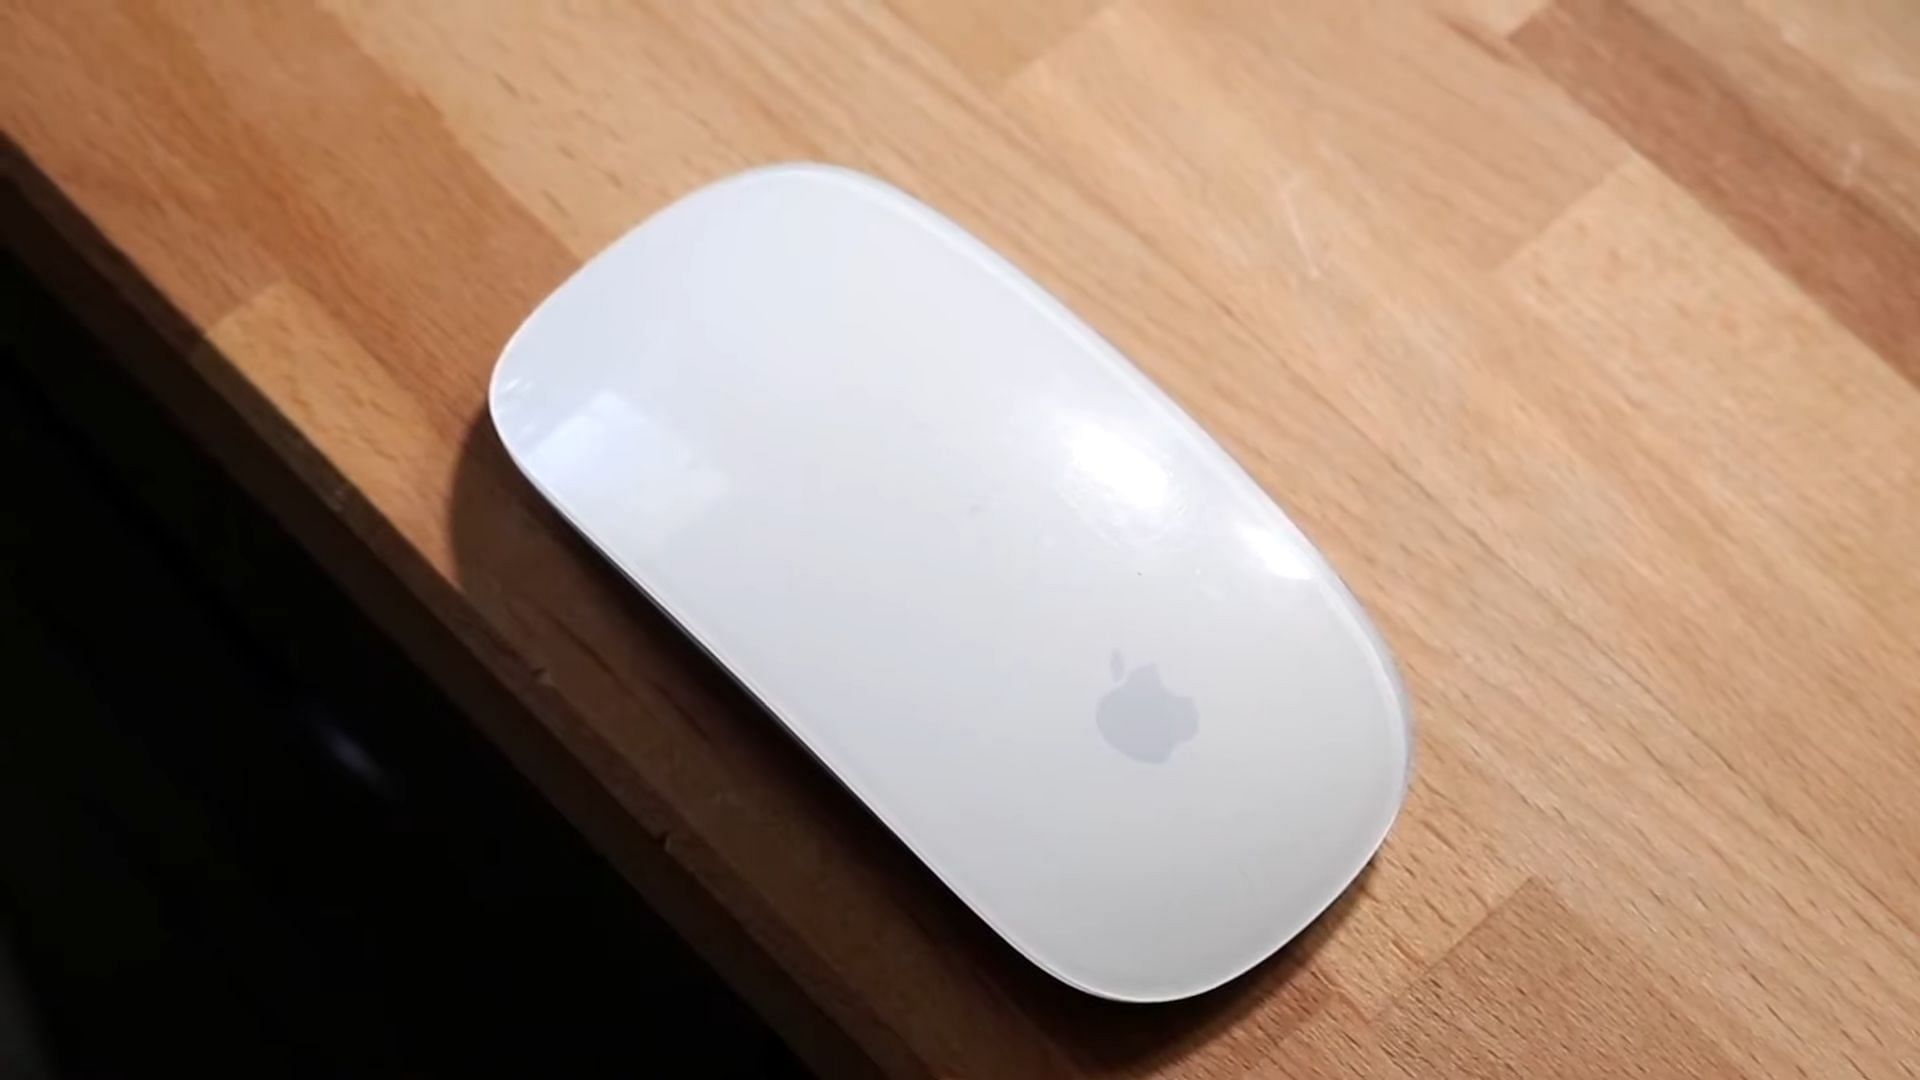 The Apple Magic Mouse is available for a discount (Image via youtube.com/@SimpleAlpaca)